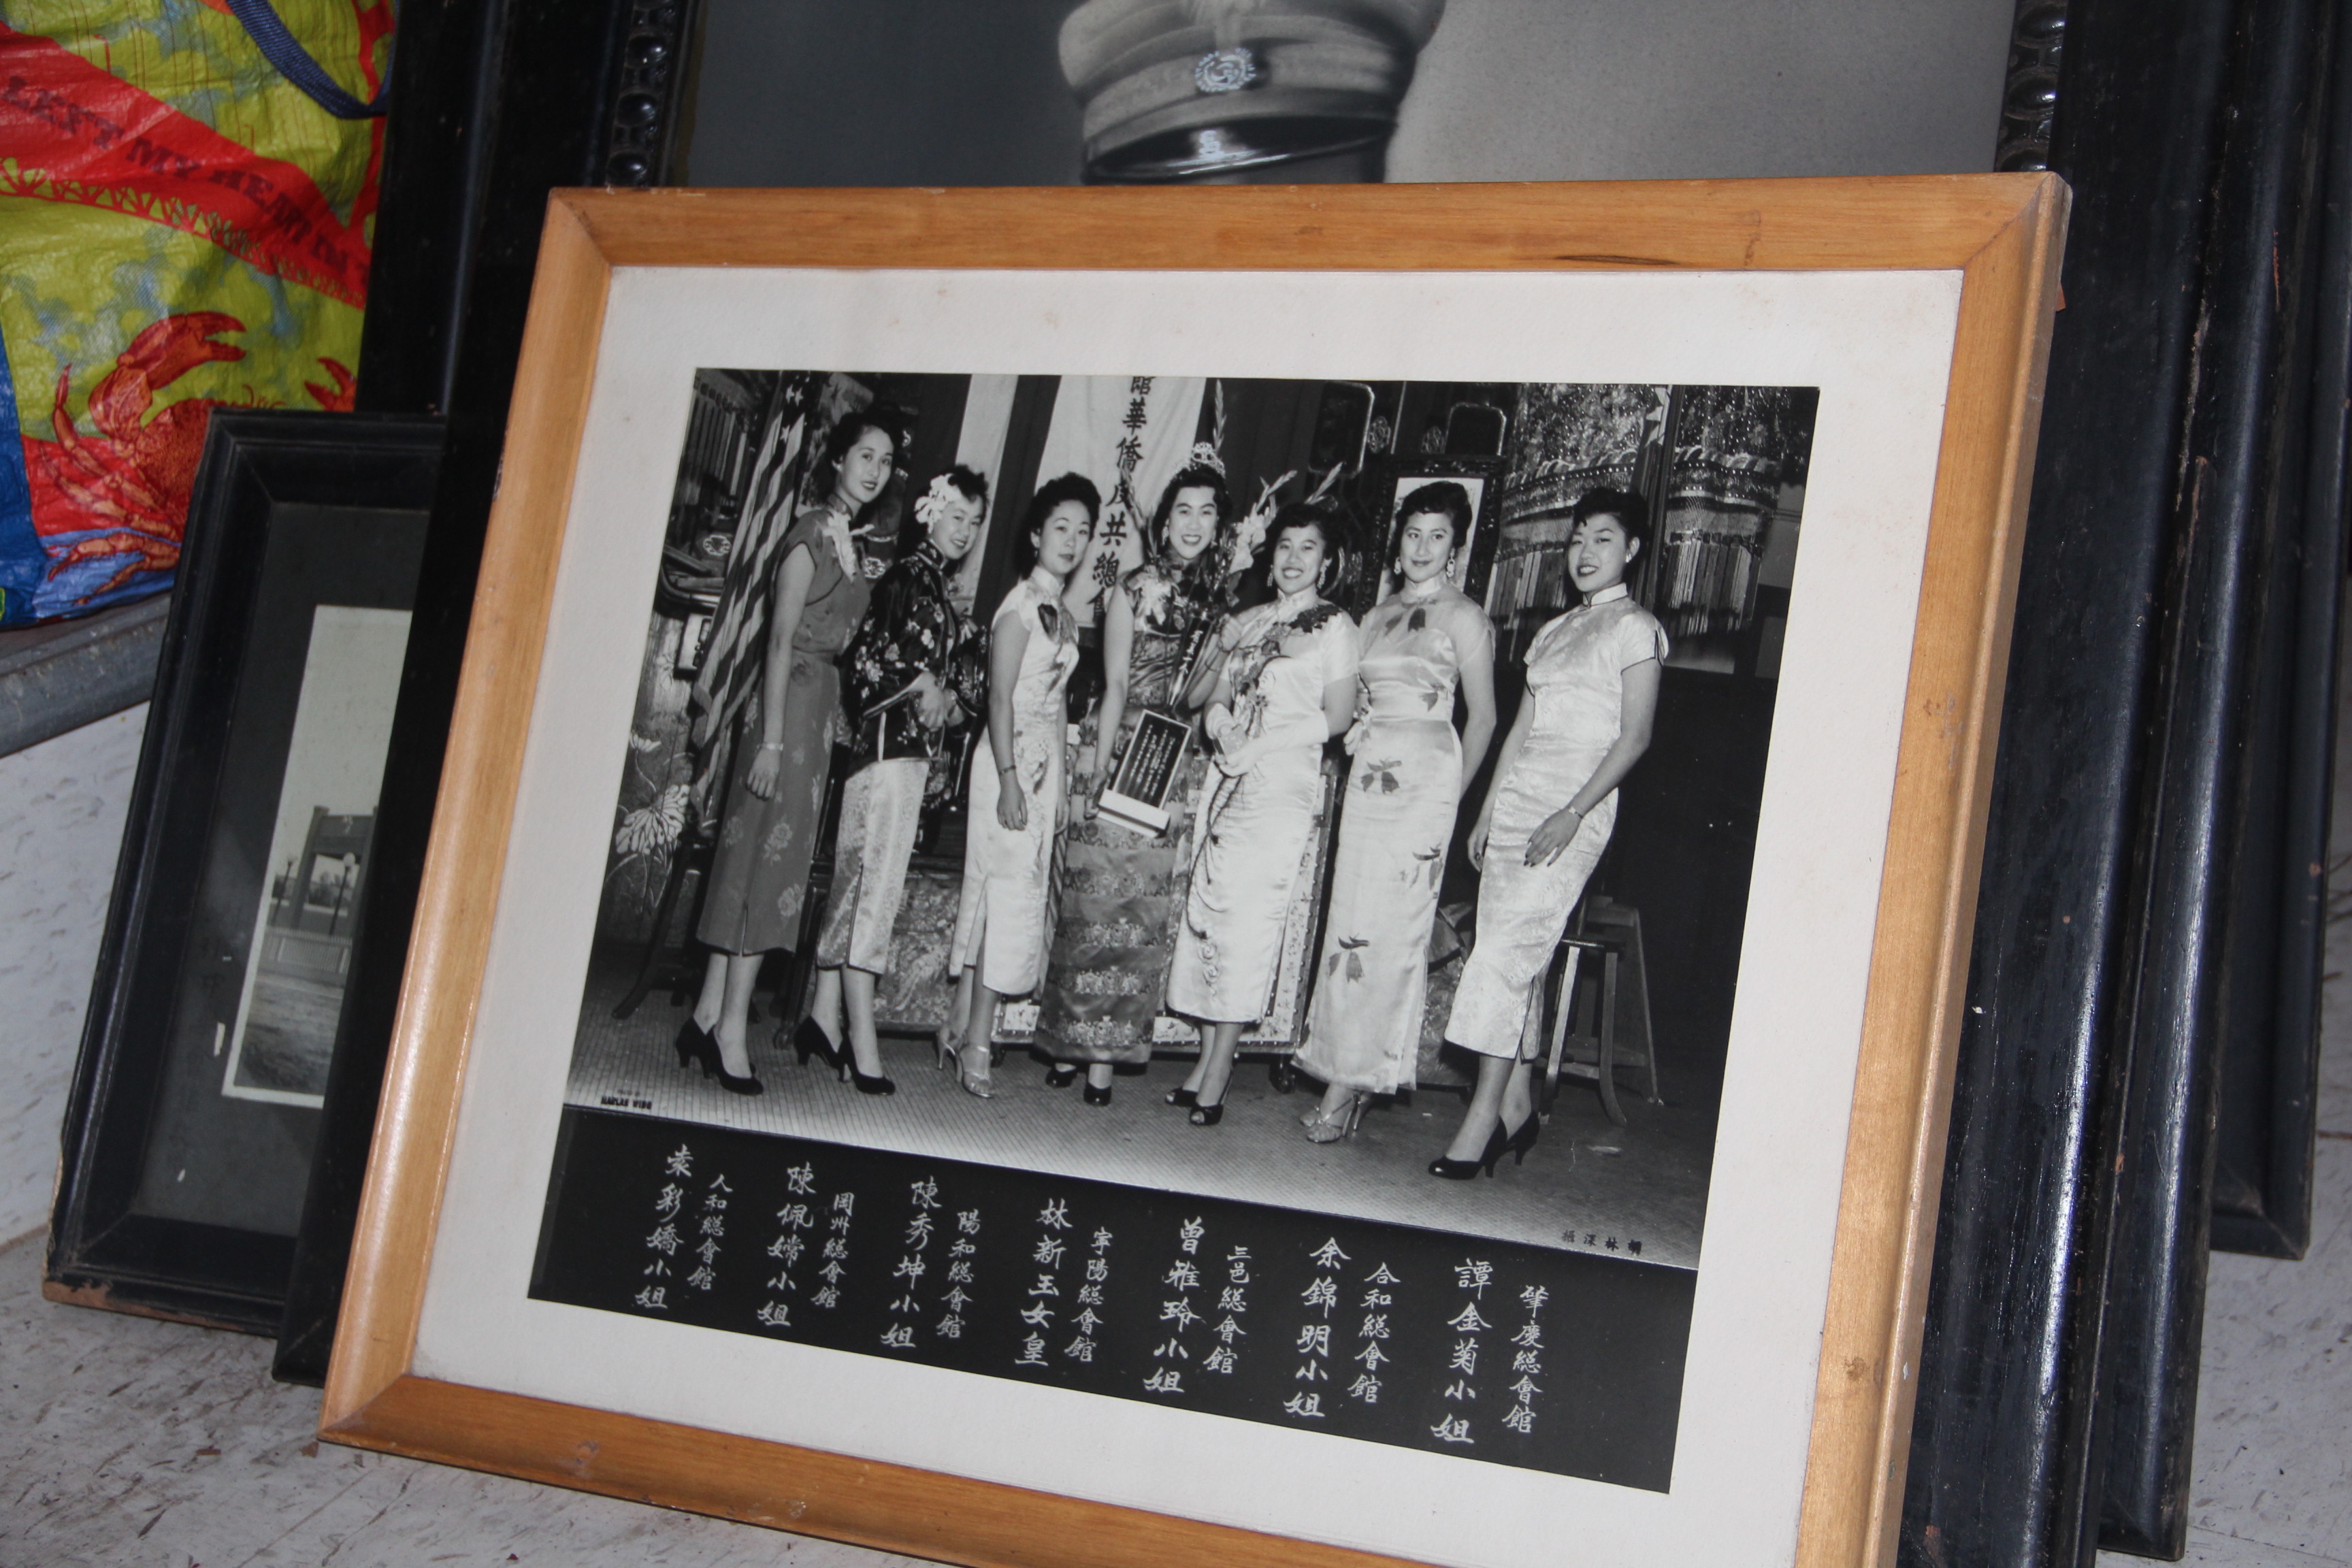 A historic photo shows the Miss Chinatown U.S.A. queens in 1955.